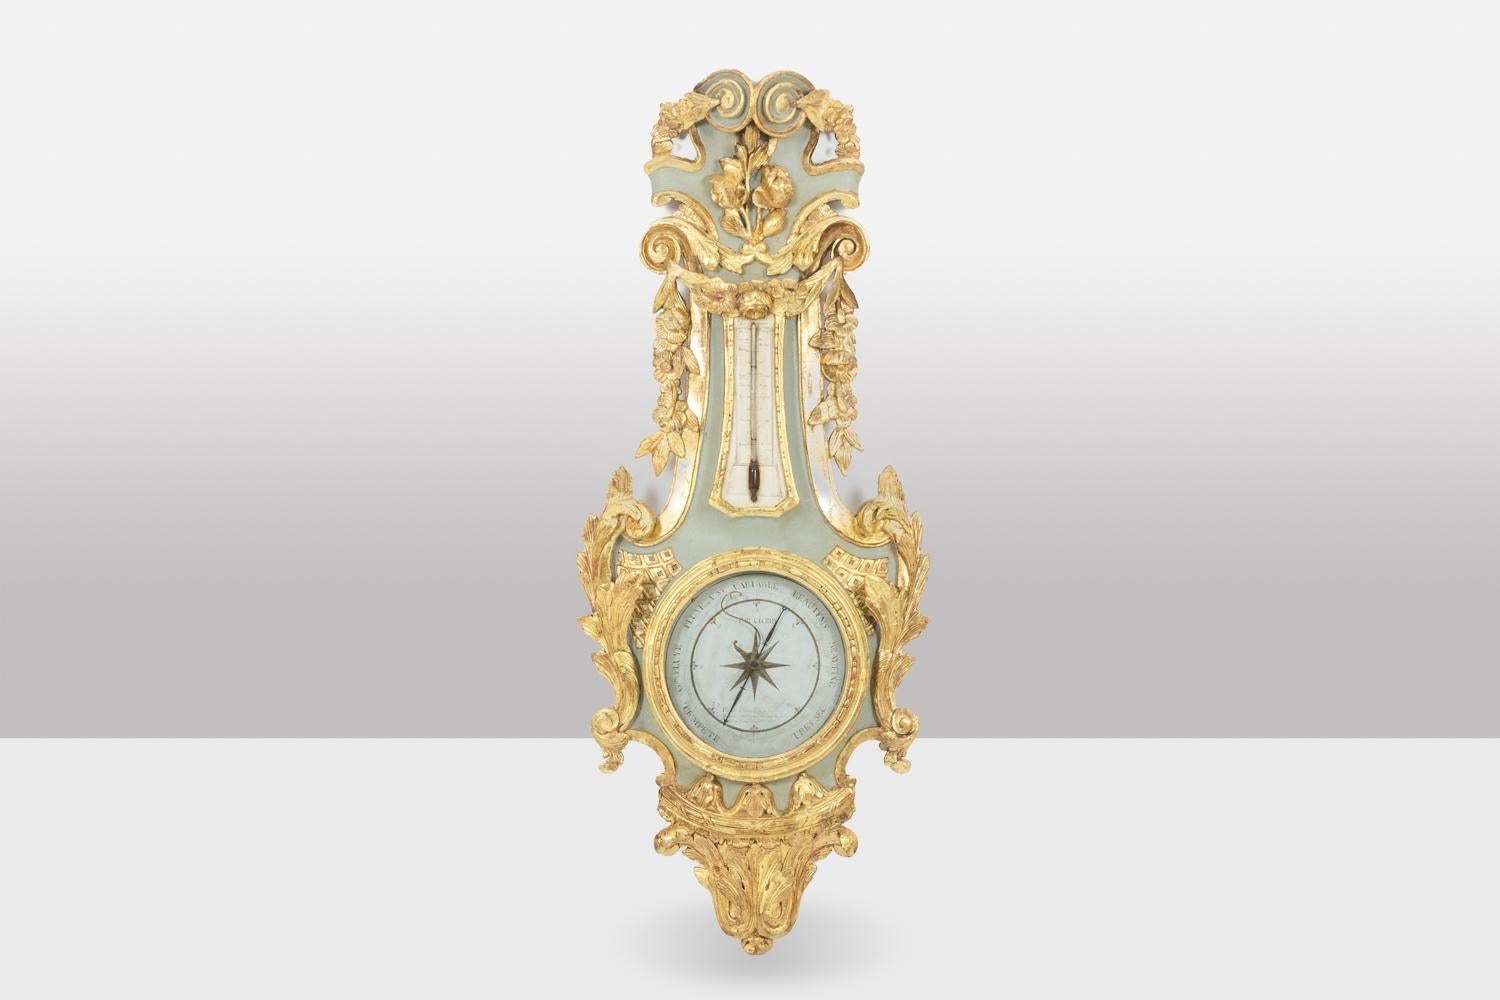 Cicery, signed.

Barometer-thermometer in carved and gilded wood with its lacquered background in green tones, the circular-shaped barometer in the central part, the rectangular-shaped thermometer in the upper part. In the upper part, waves,